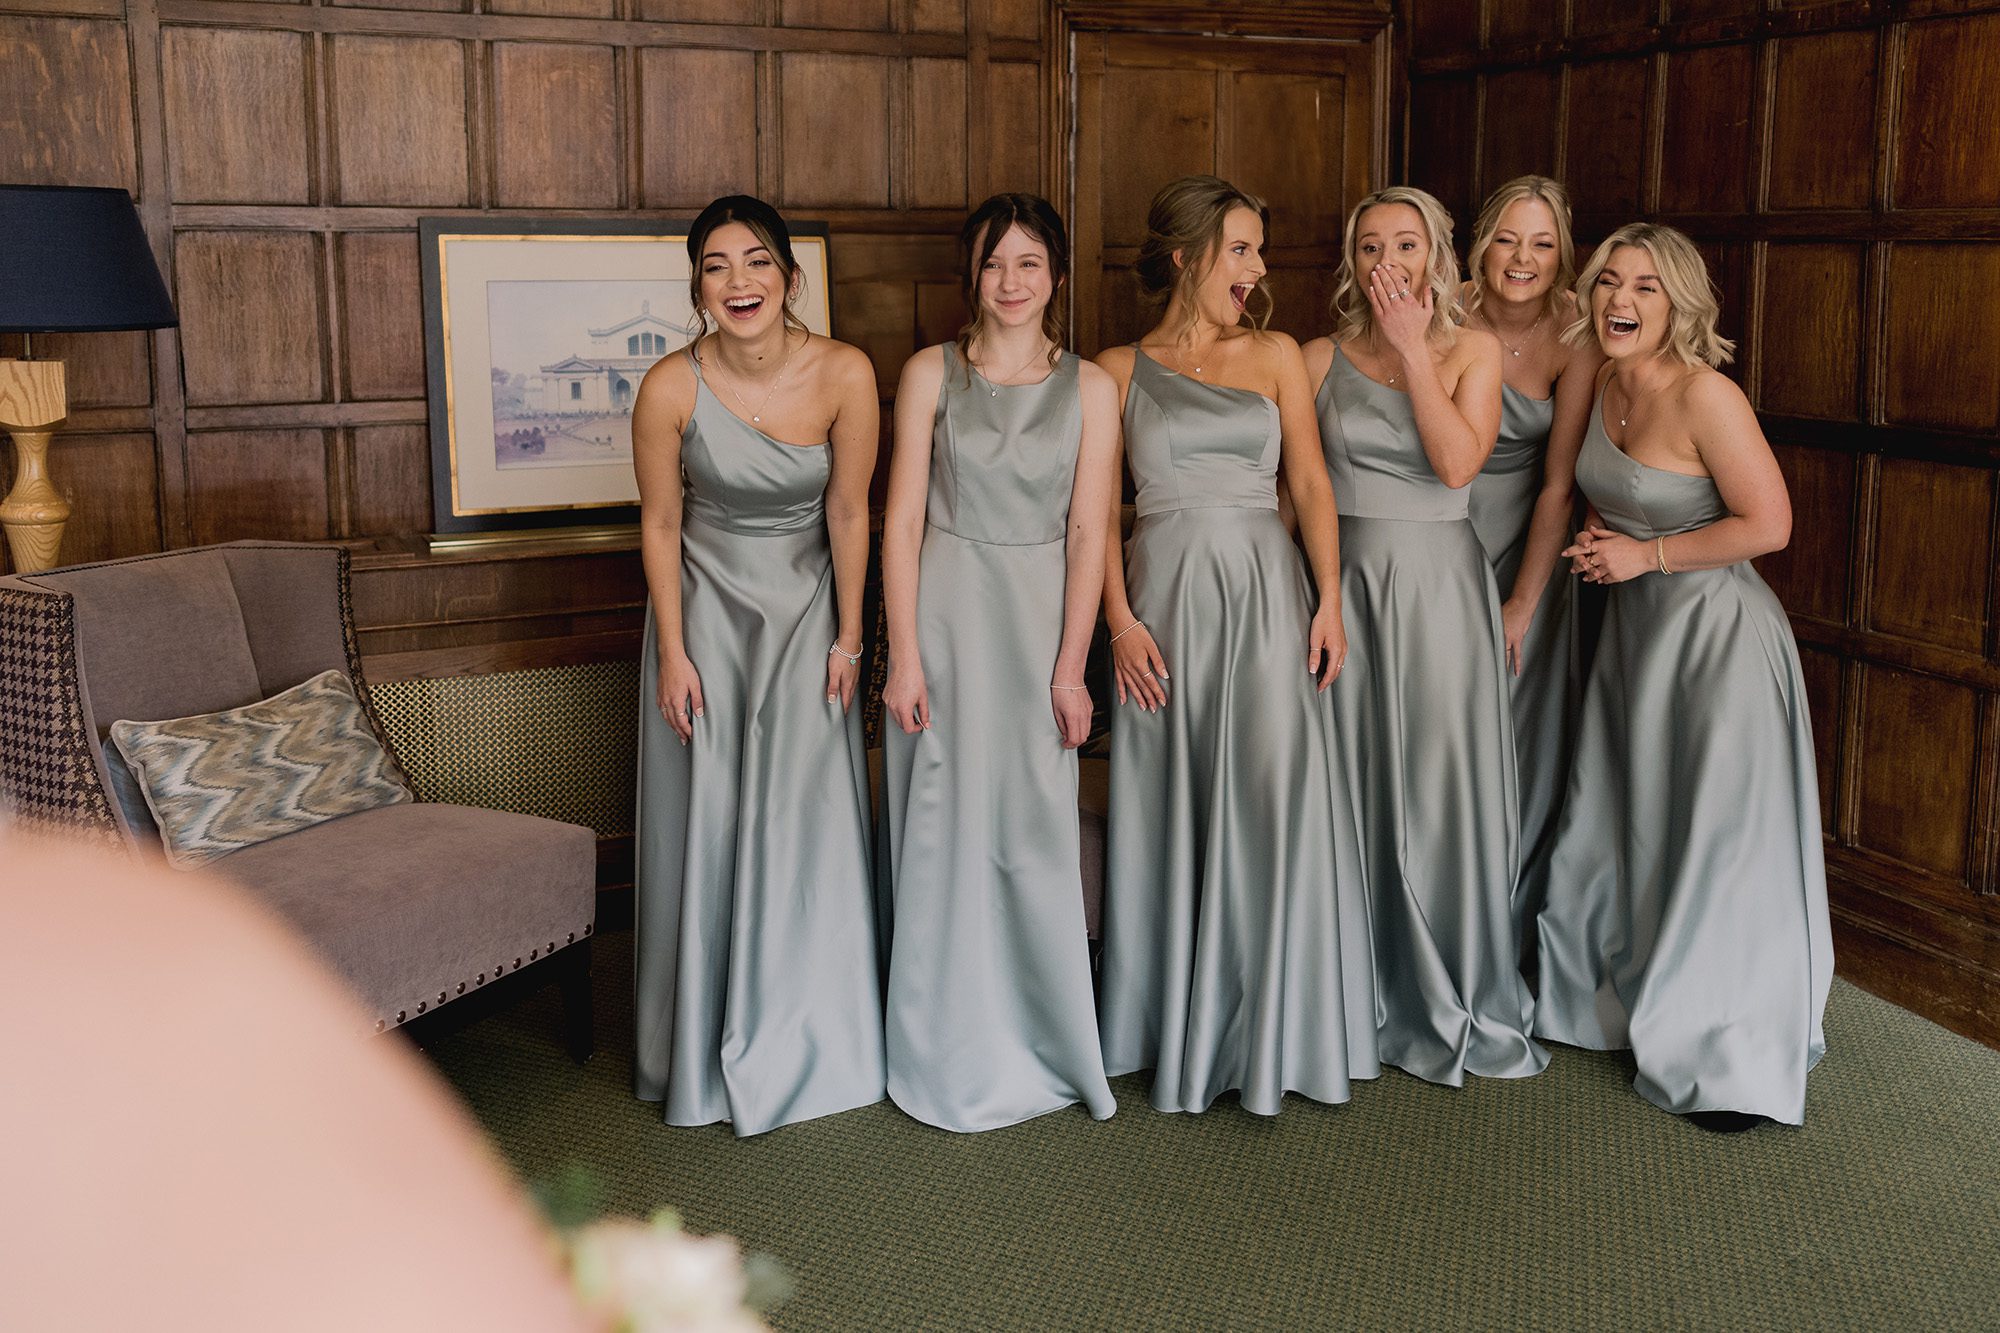 Reportage photography as bridesmaids are excited as they see the bride for the first time in her dress.